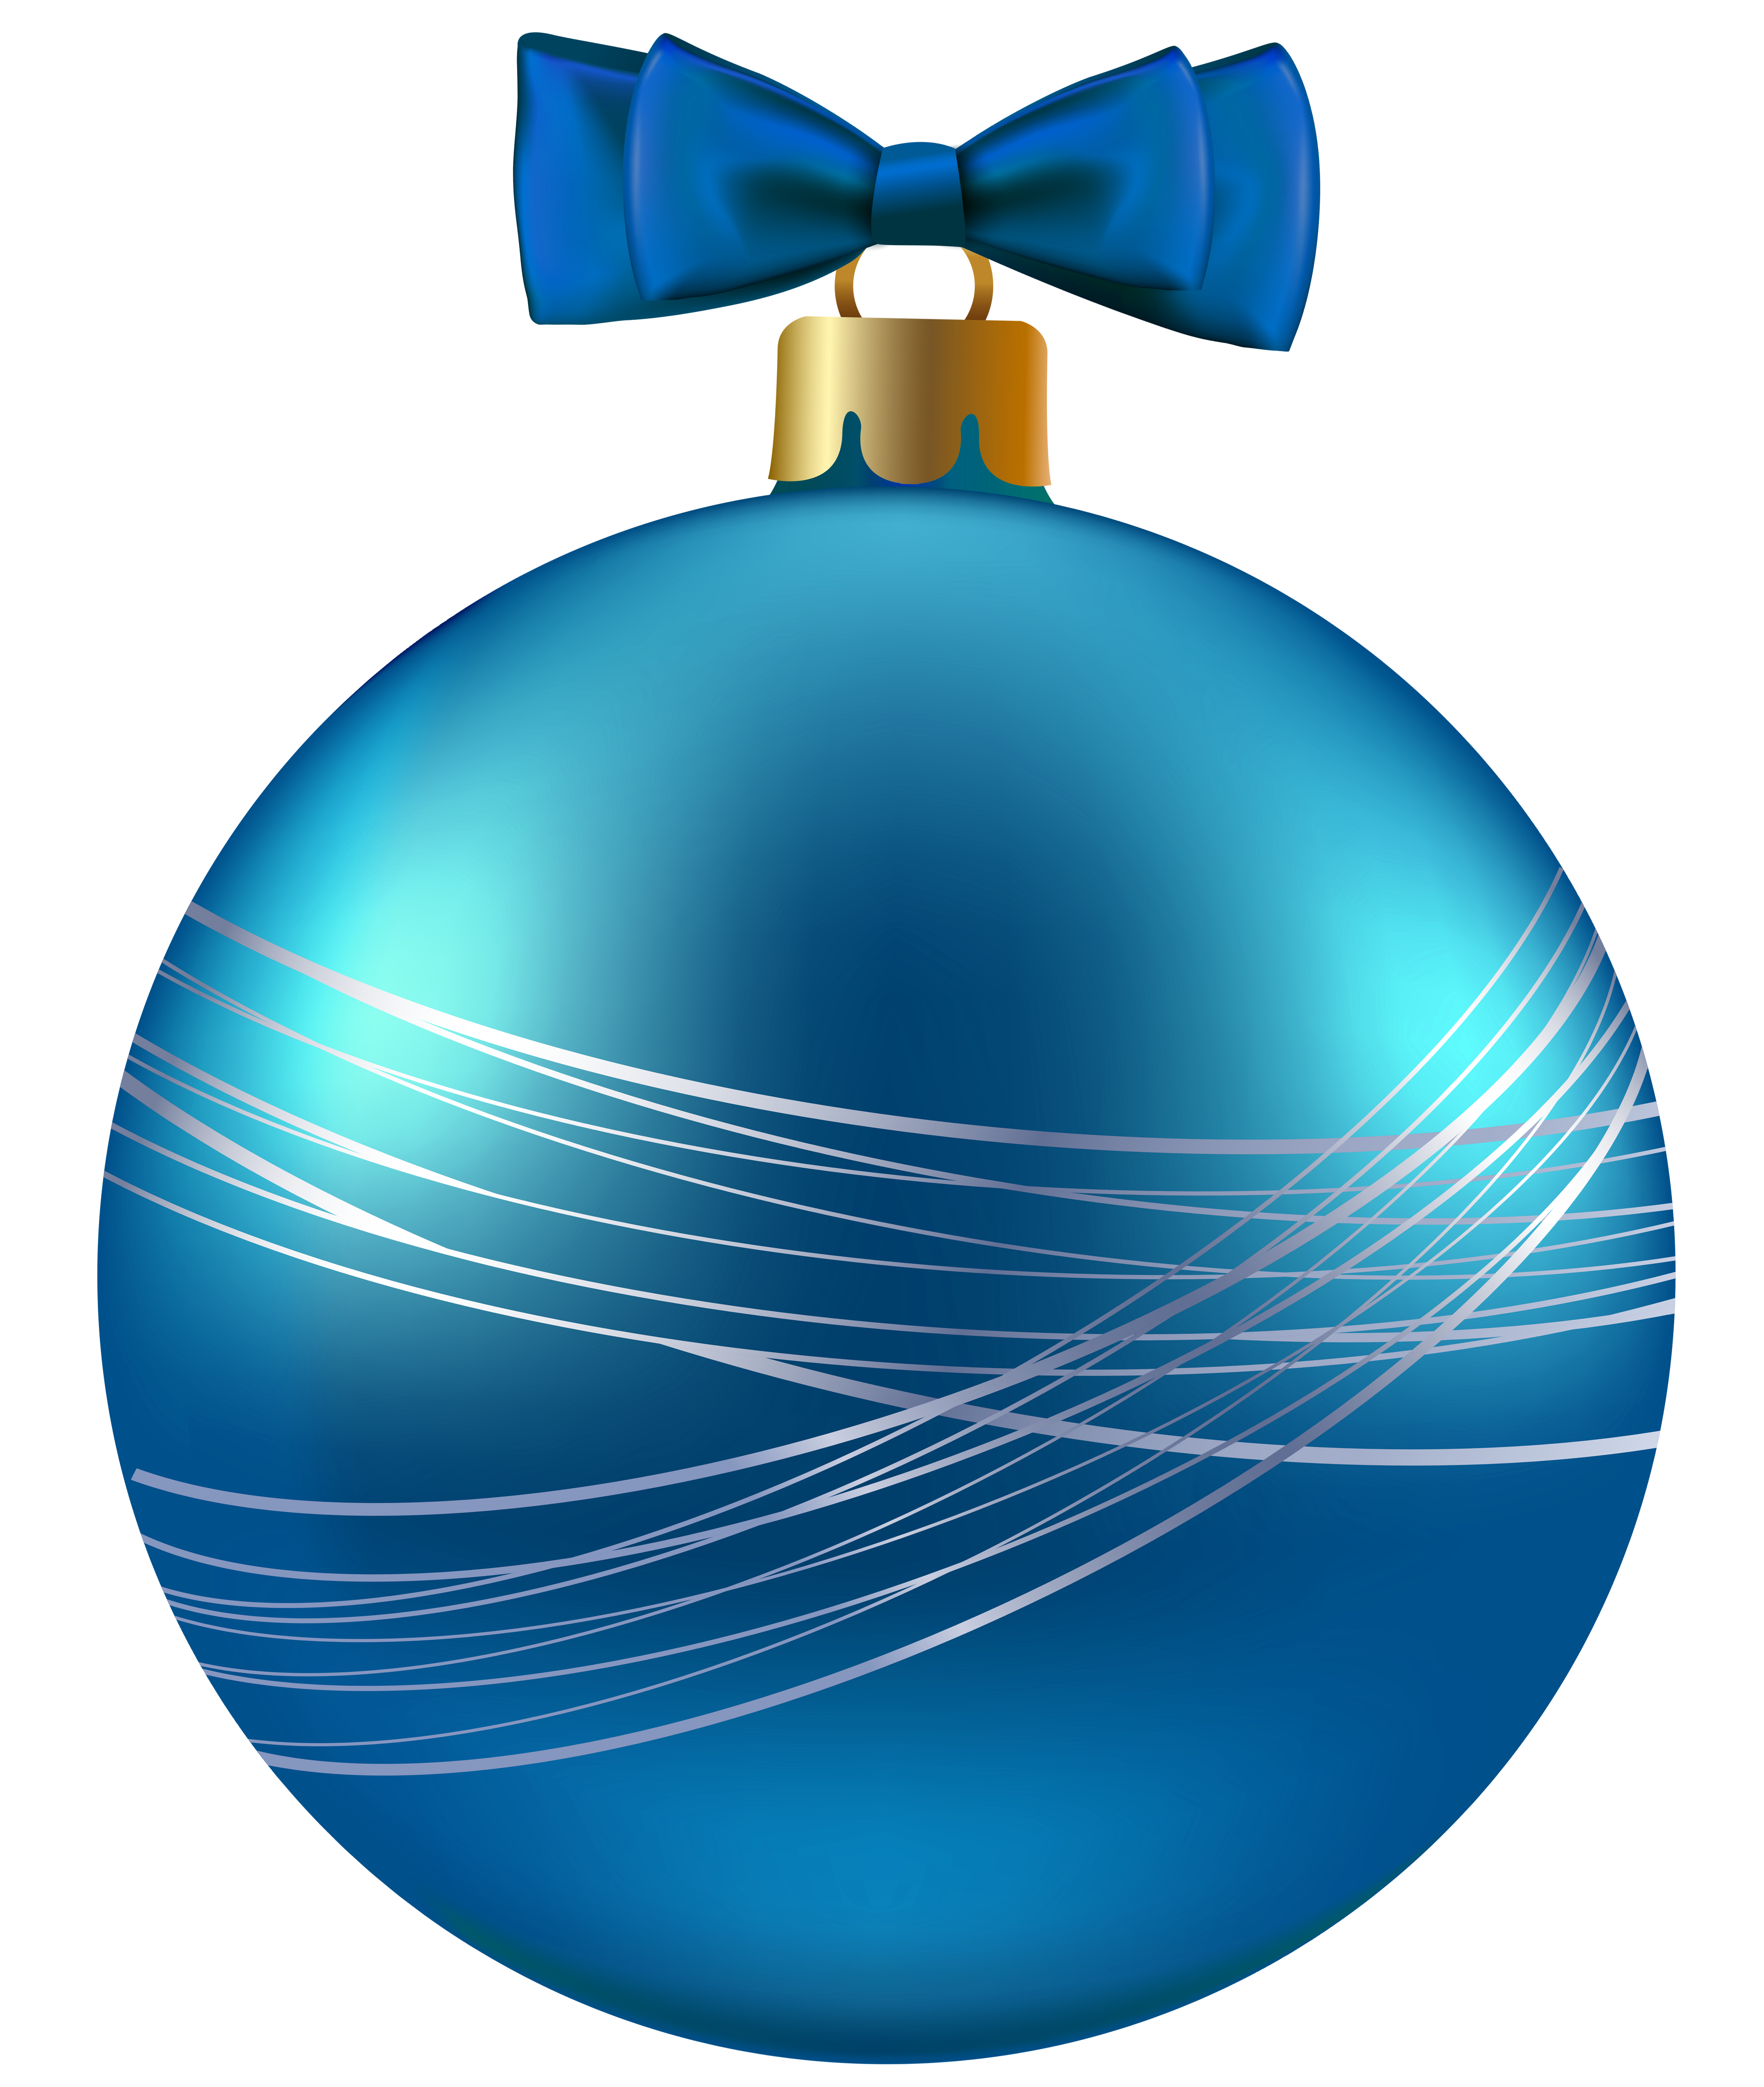 Blue Christmas Ornament PNG Clipart Image